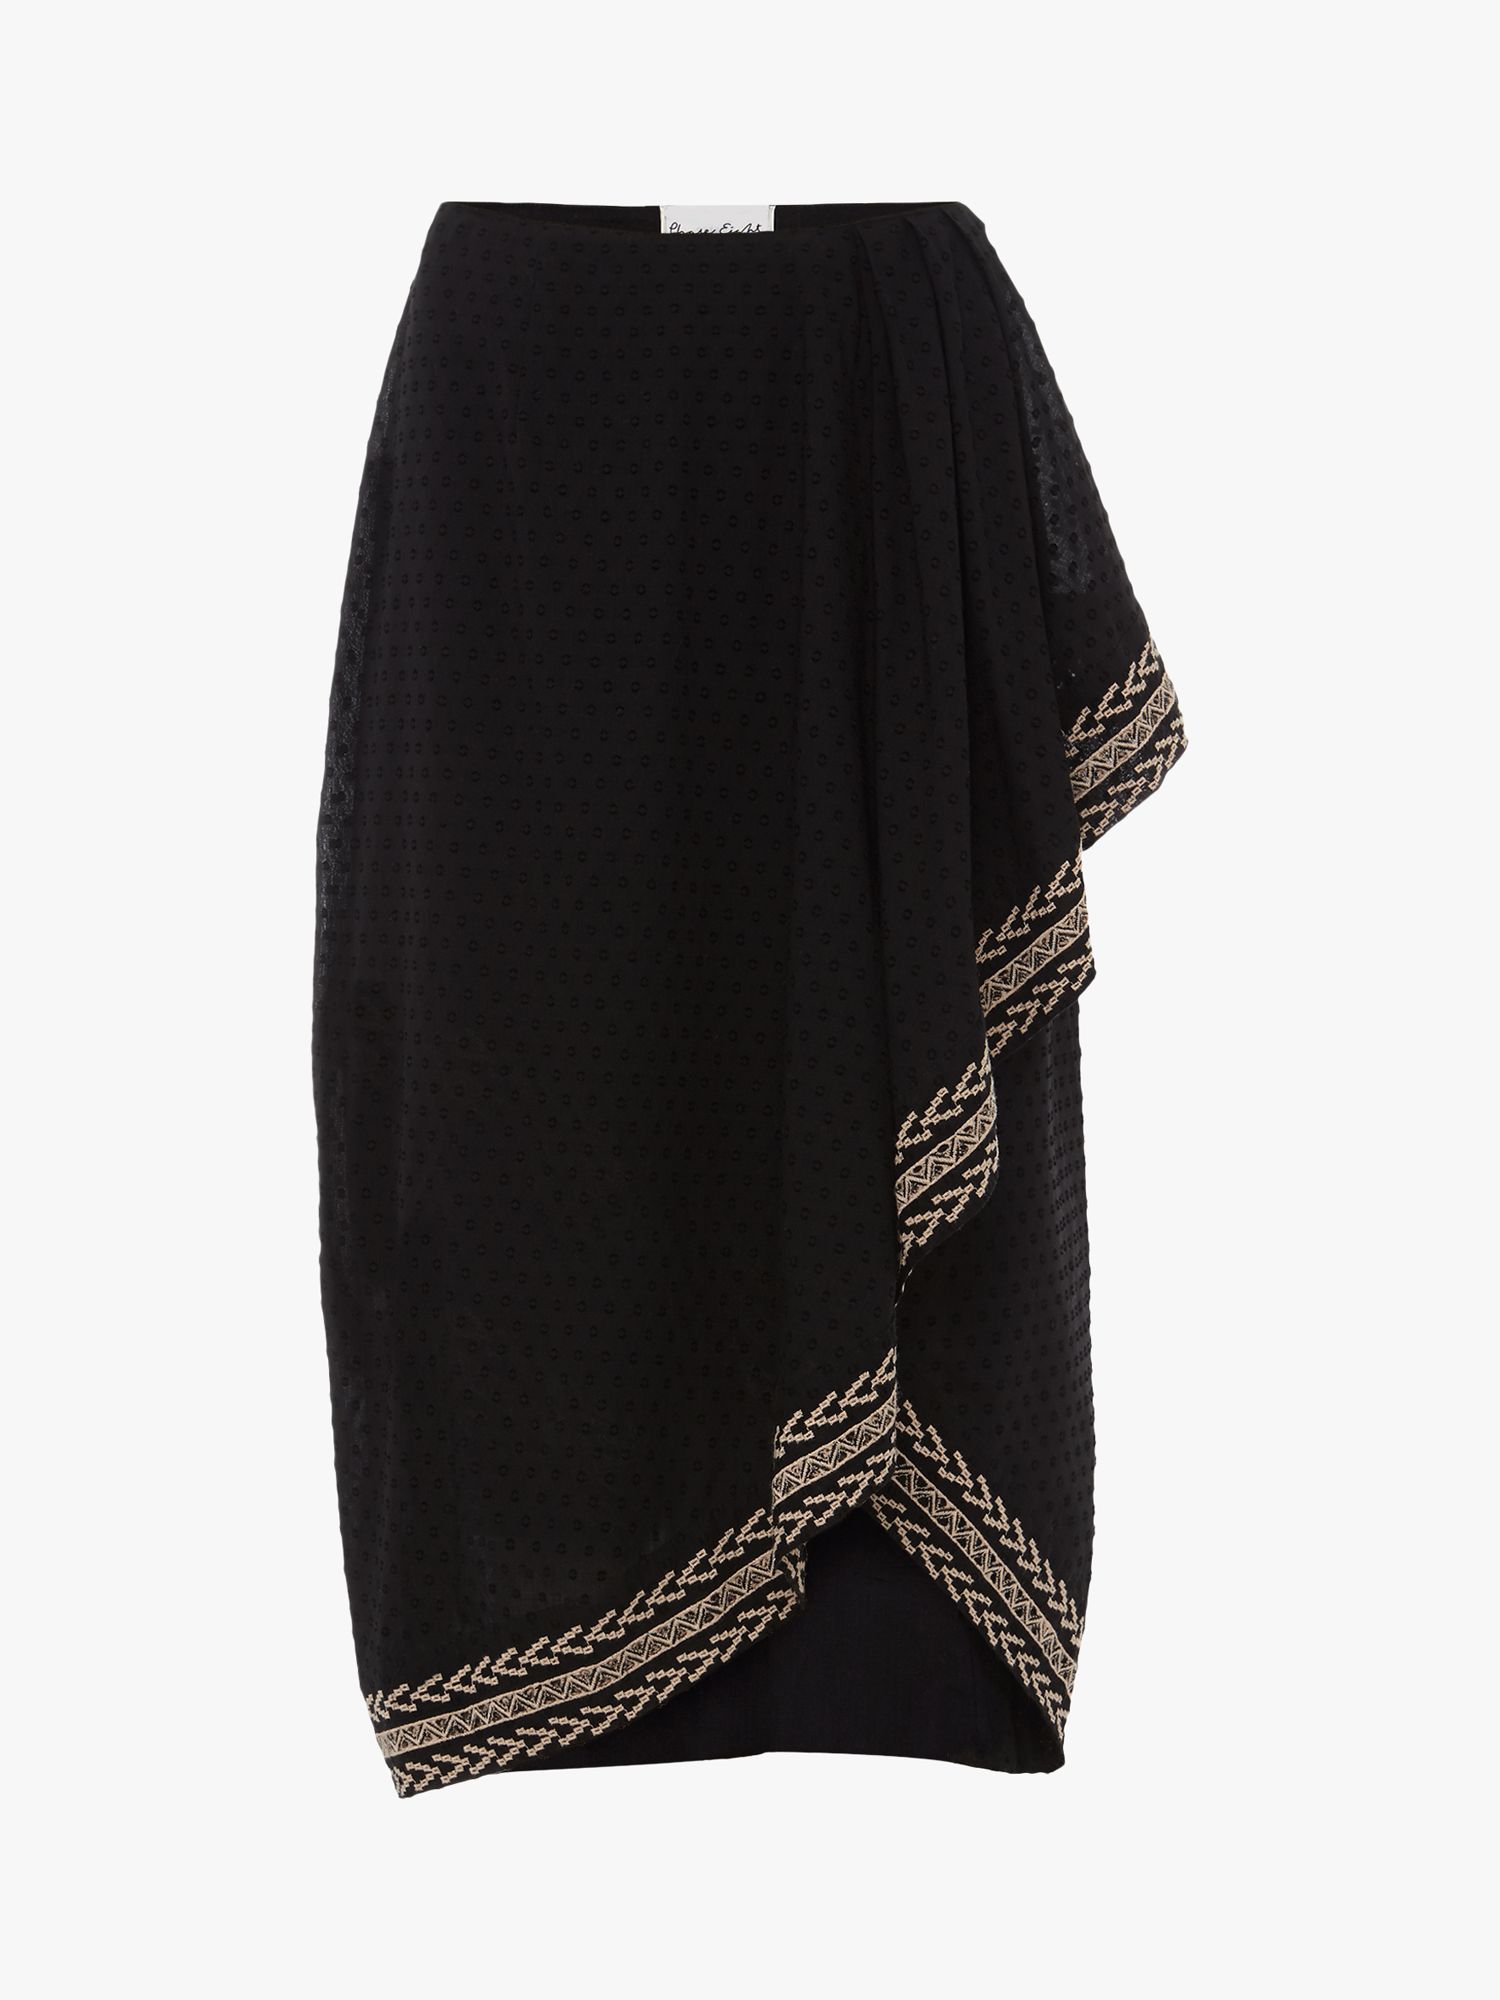 Phase Eight Debby Embroidered Skirt, Black at John Lewis & Partners